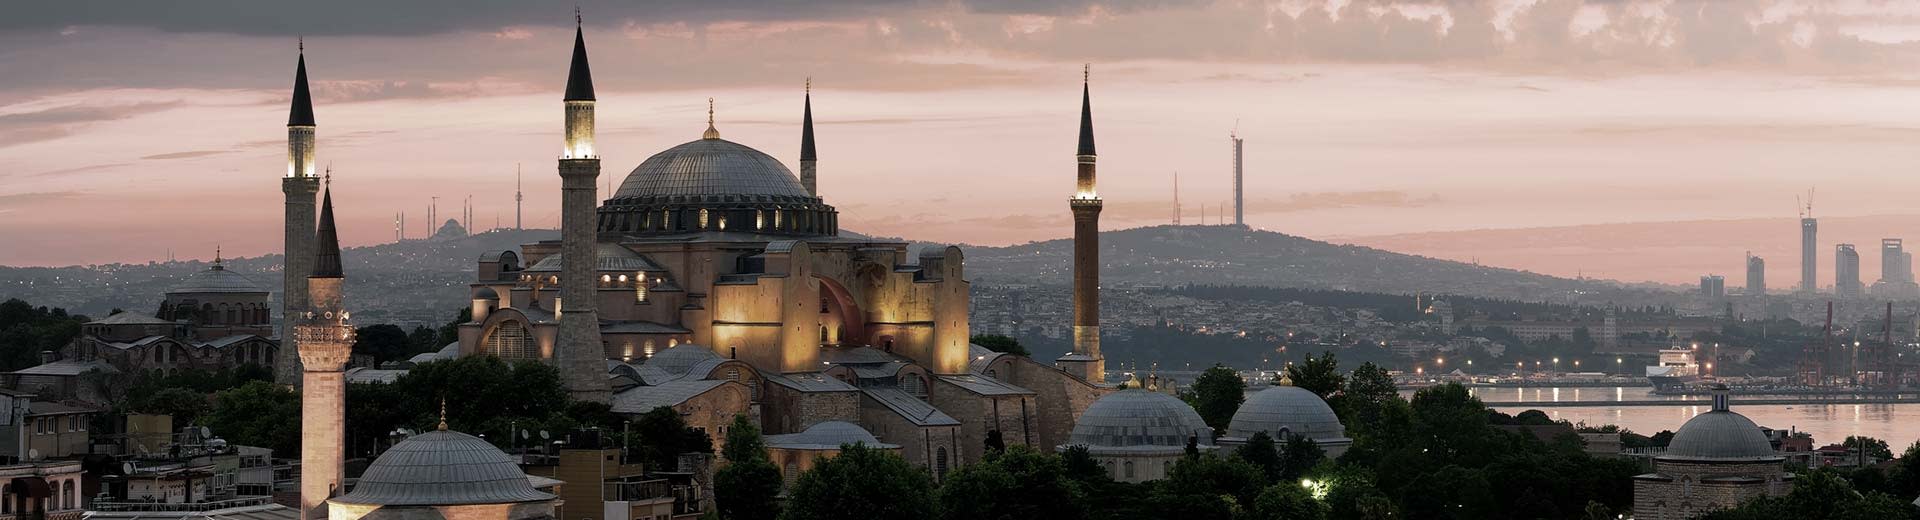 A Mosque silhouetted against the setting sun in Istanbul.